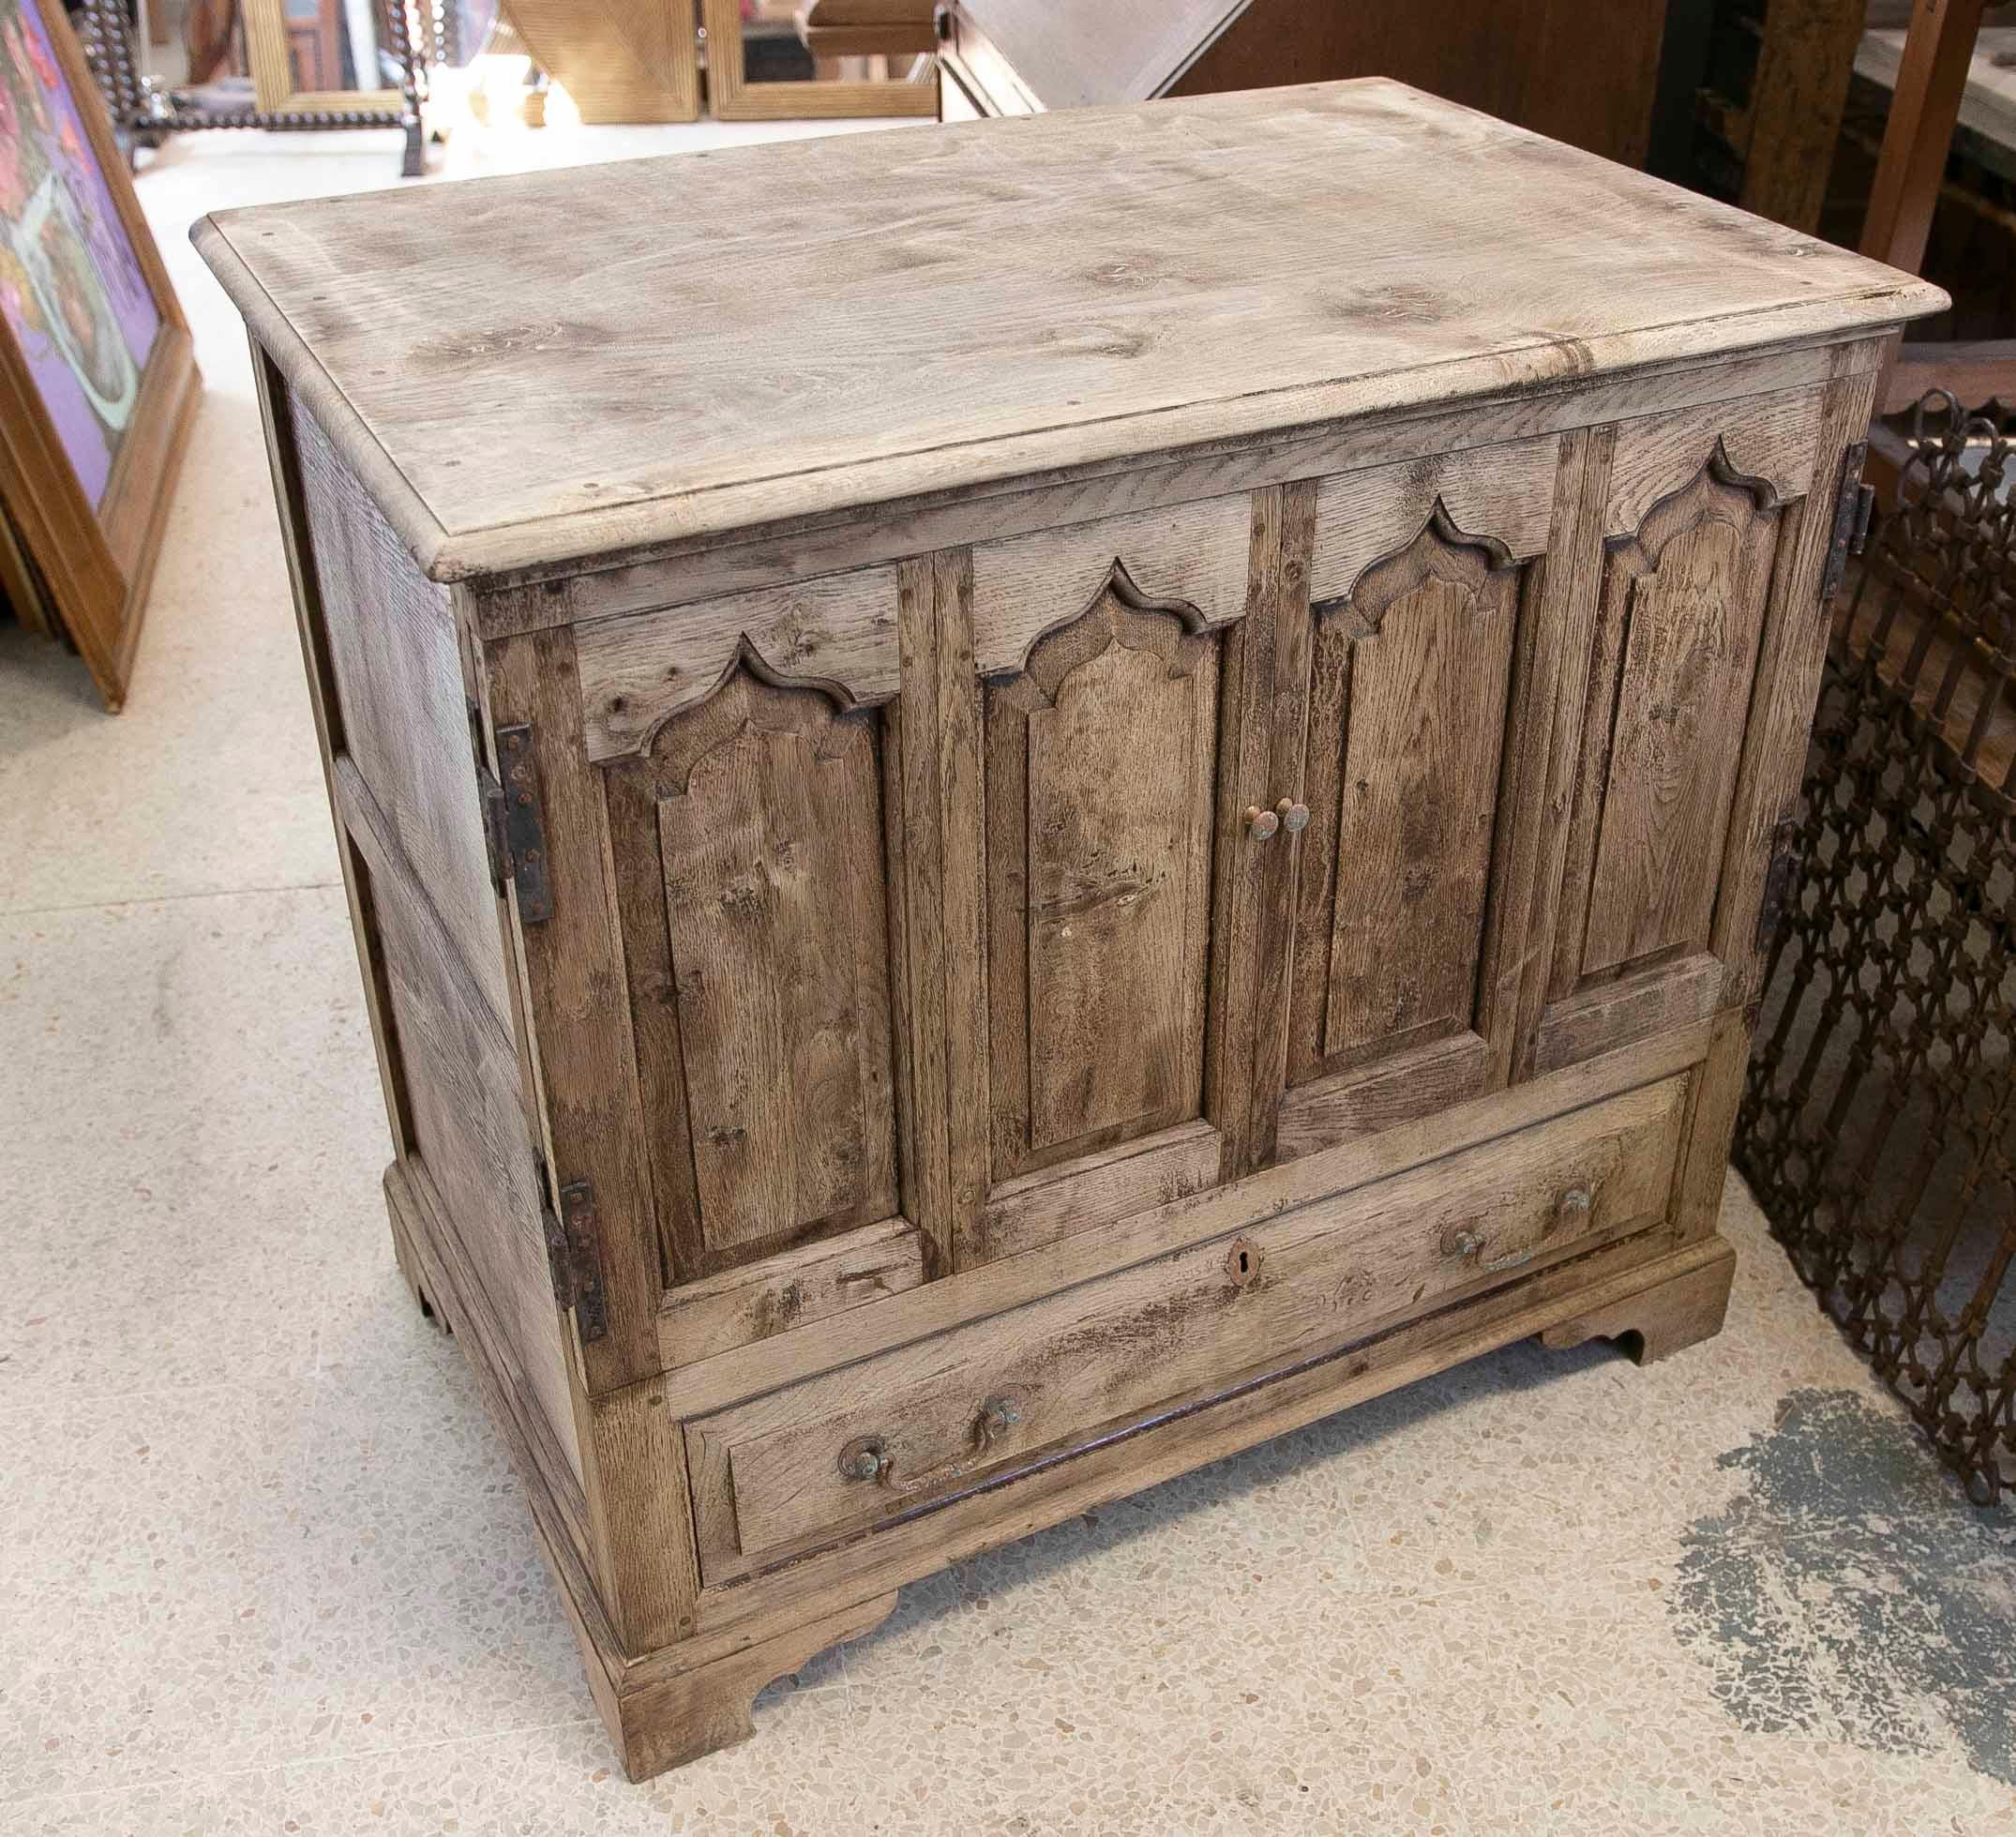 19th Century English Furniture with Doors and Drawer in the Tone of its Wood In Good Condition For Sale In Marbella, ES